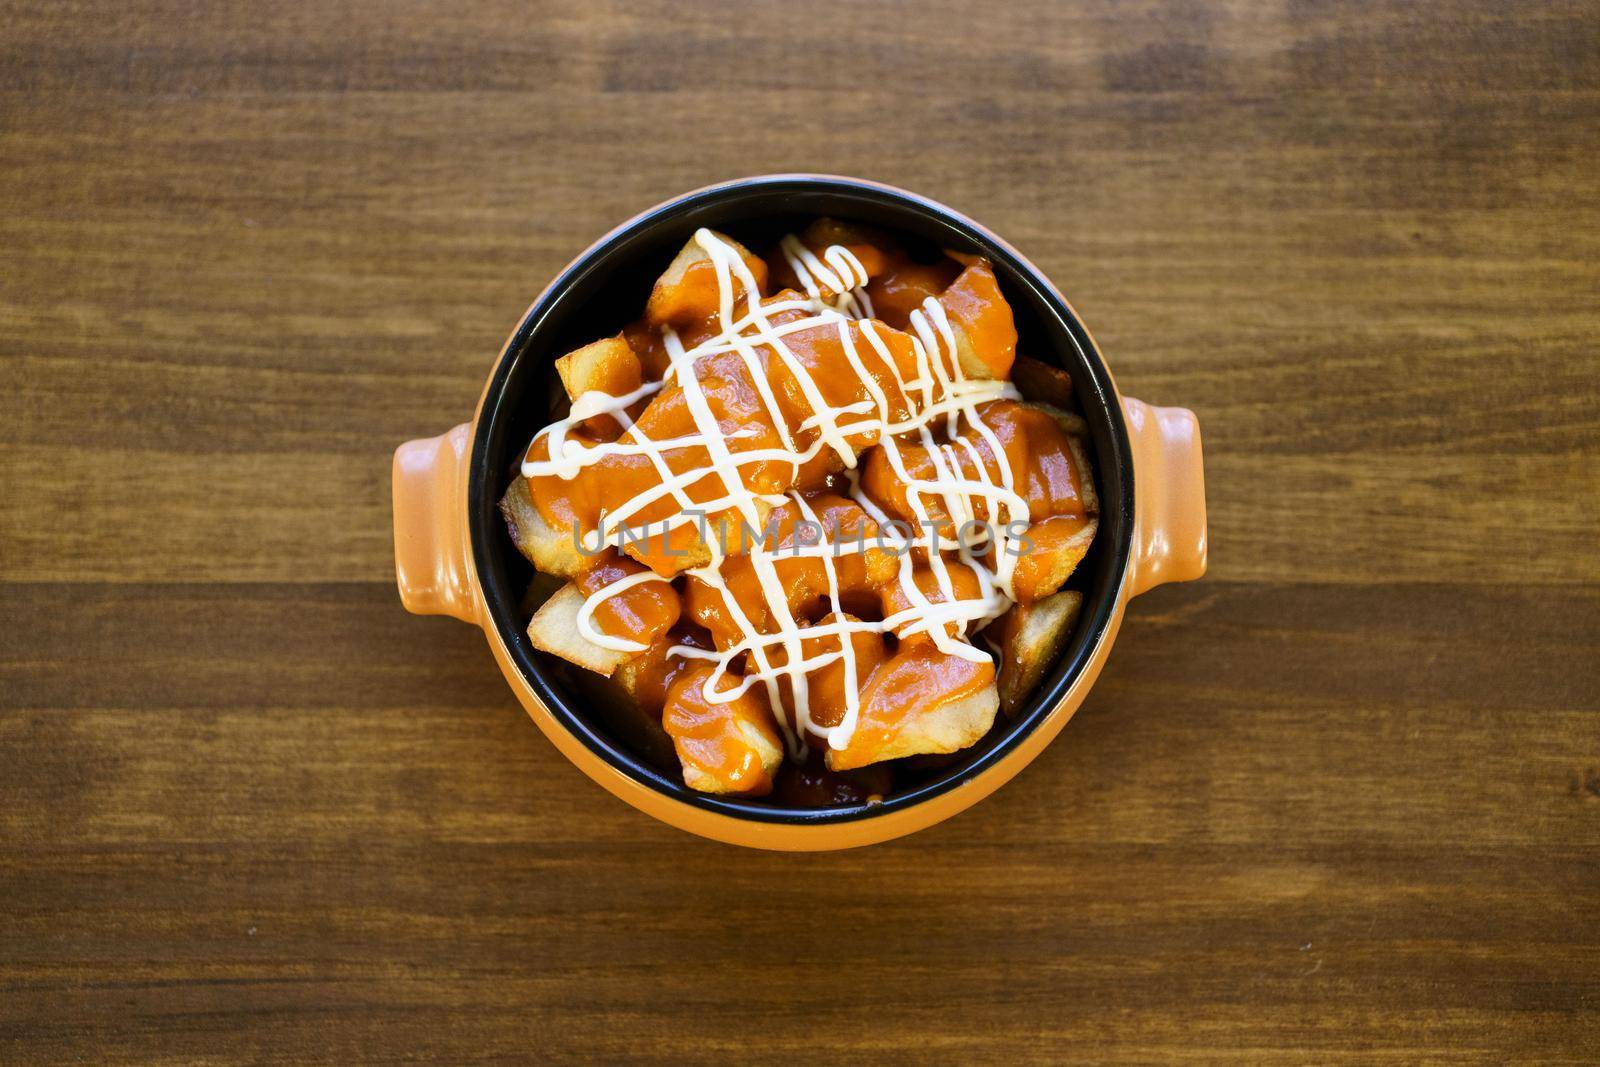 Plate of patatas bravas, a typical Spanish dish, on restaurant table by javiindy